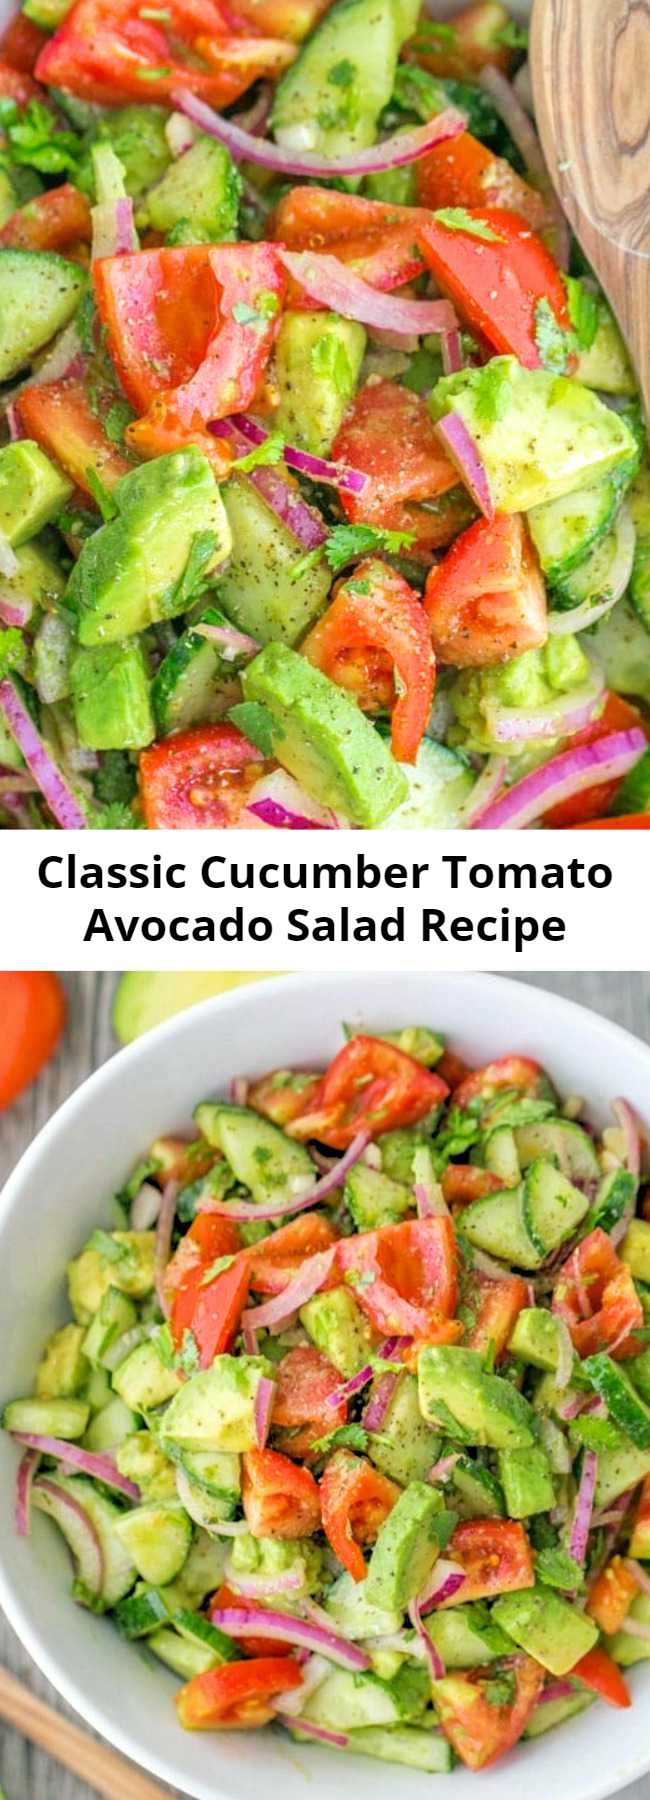 Our favorite classic cucumber and tomato salad just got better with the addition of avocado, a light and flavorful lemon dressing and the freshness of cilantro. Easy, excellent avocado salad.